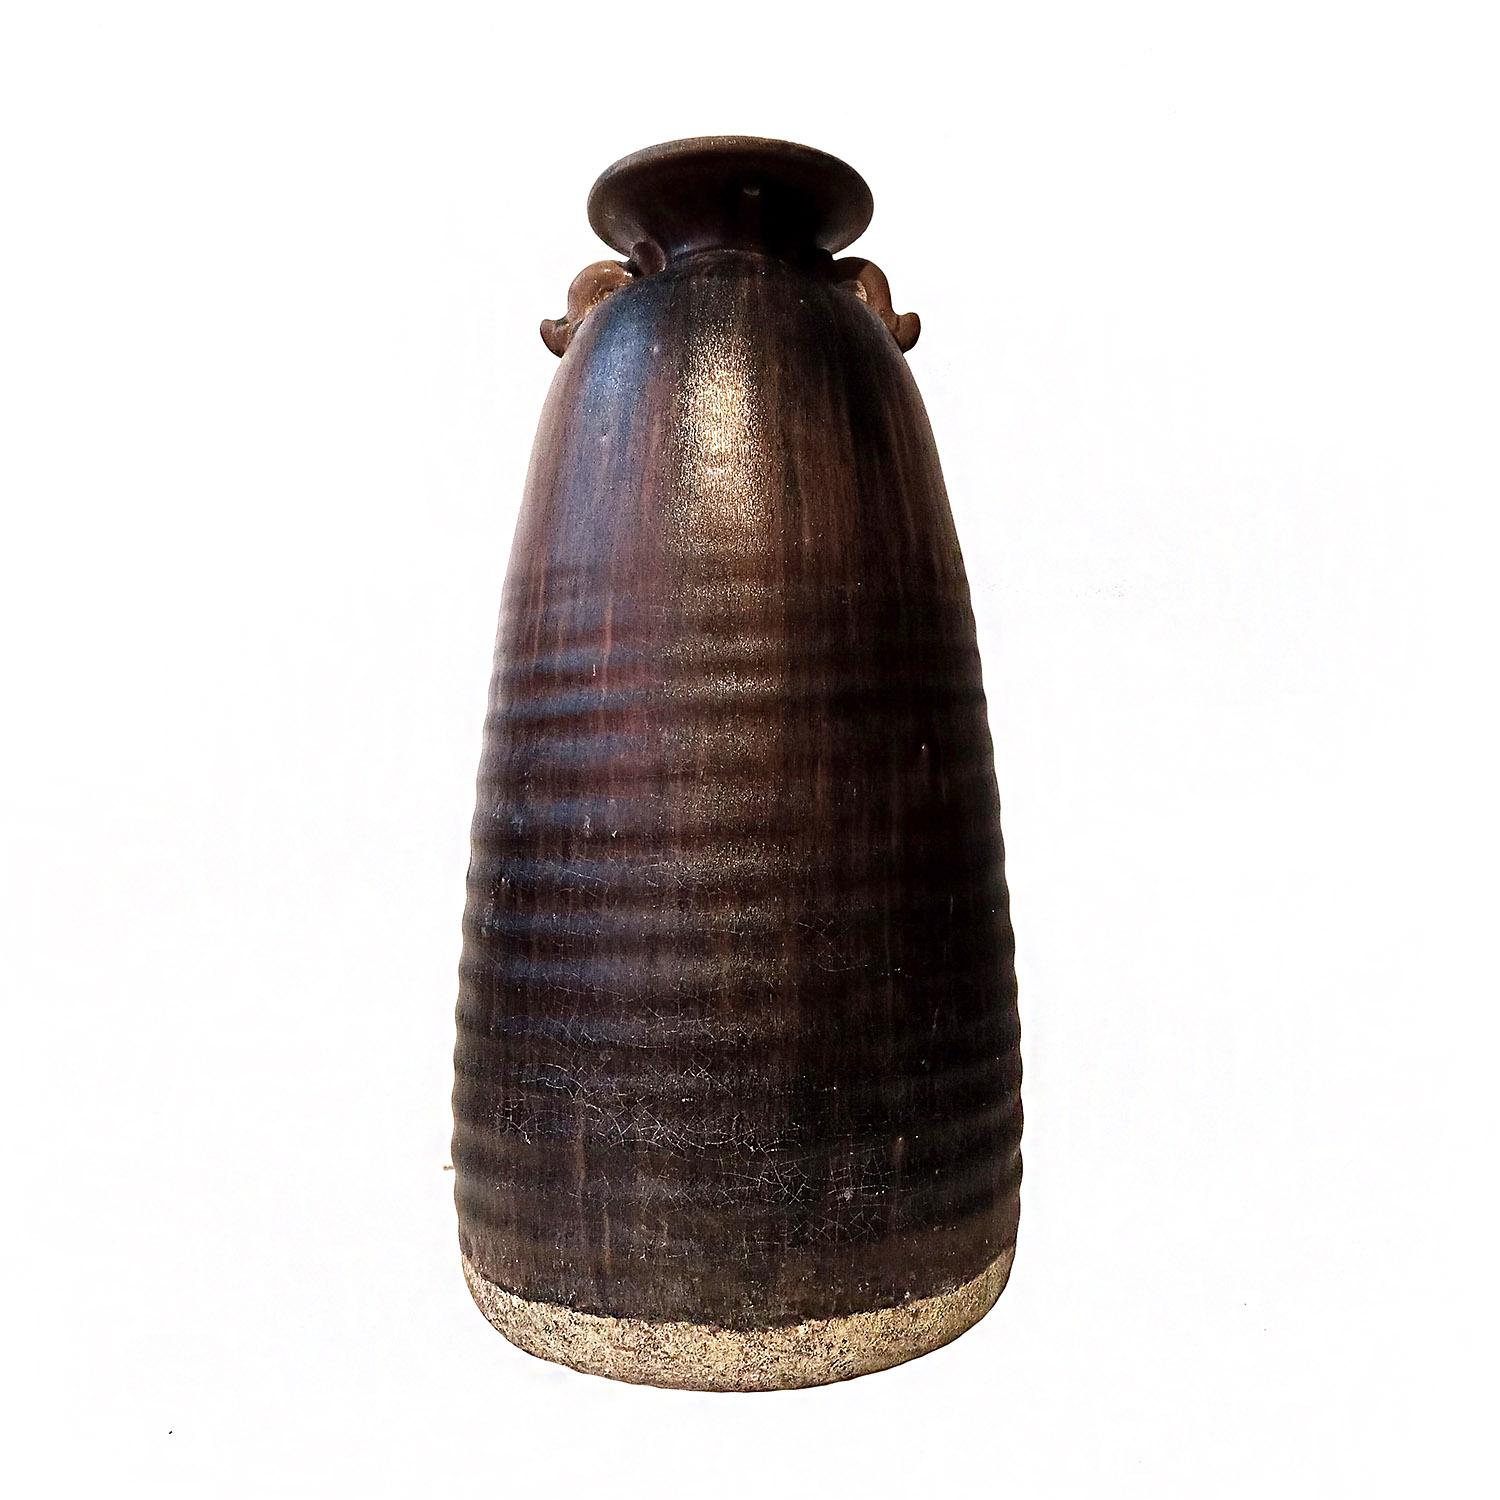 A tall brown ceramic vase / urn with dark brown glaze, with small ears on its neck. Hand-crafted in Thailand, in the tradition of antique Thai earthenware. With its ribbed texture and mottled brown glaze, this piece makes for a unique decorative